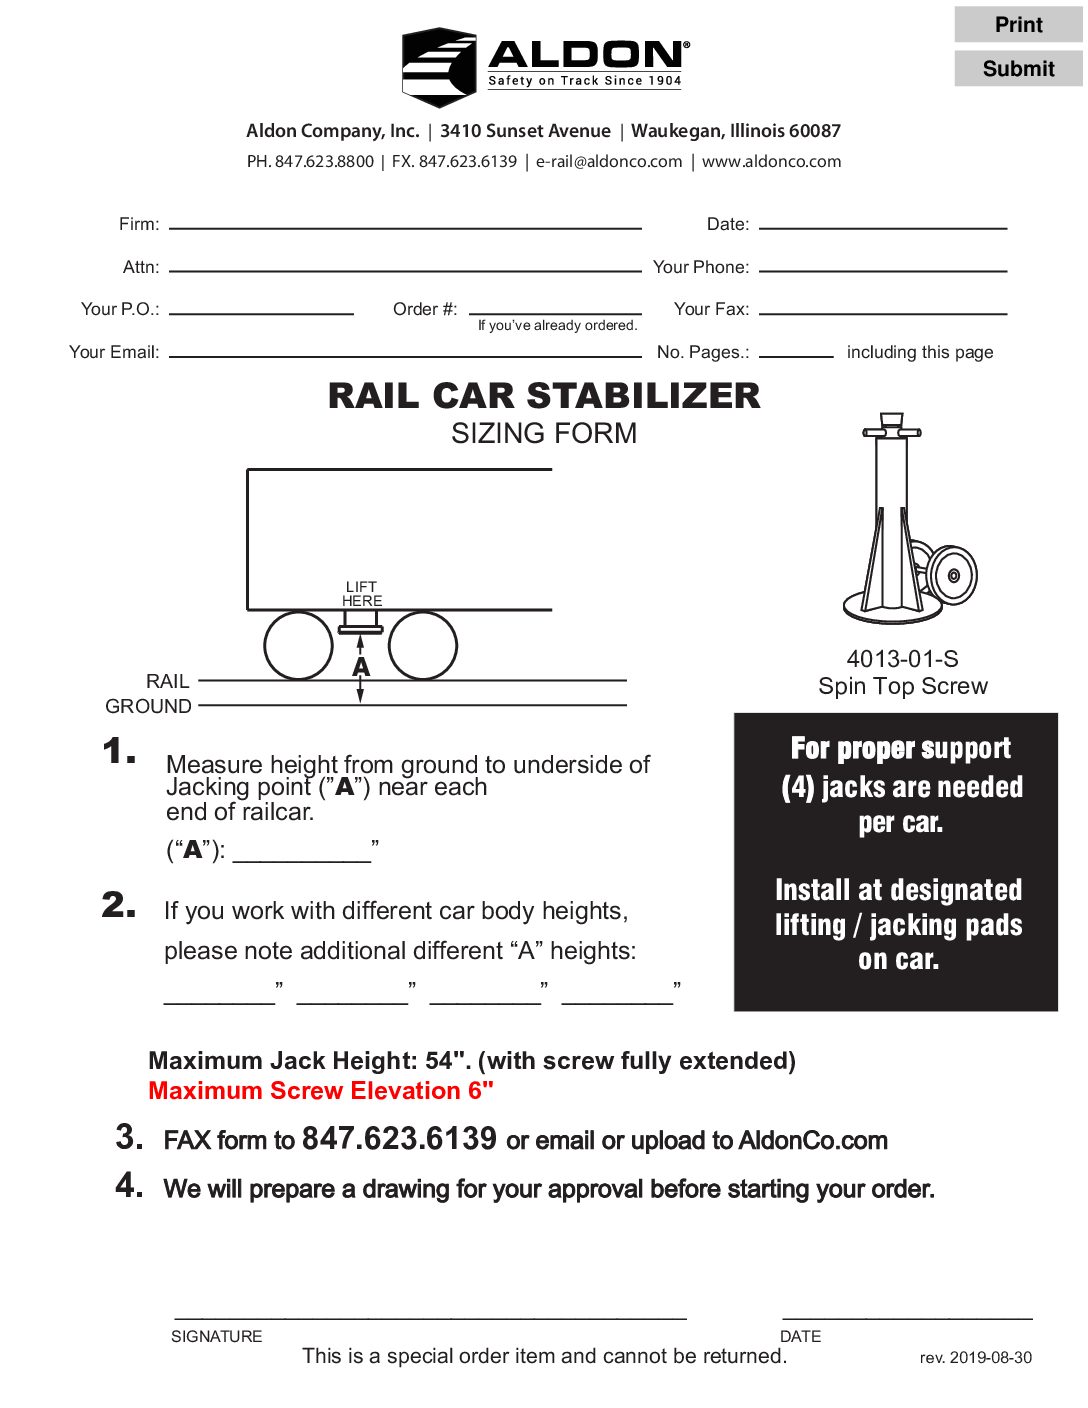 Railcar Stabilizer with Spin Top Screw